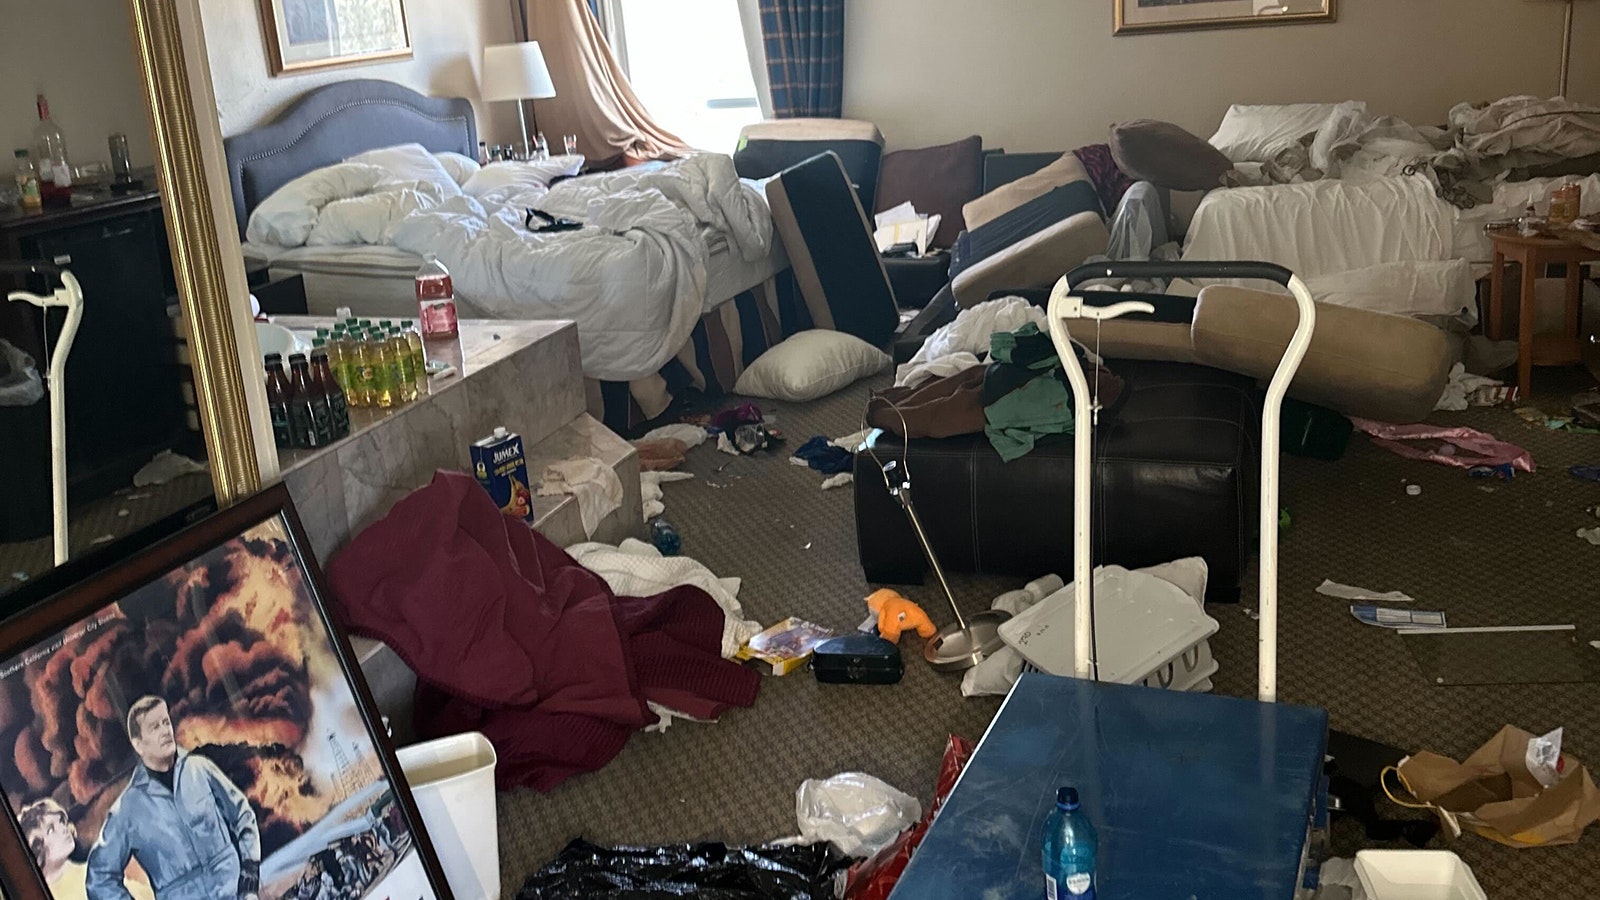 One of the trashed rooms at the Casper Econo Lodge motel, where homeless squatters stay.